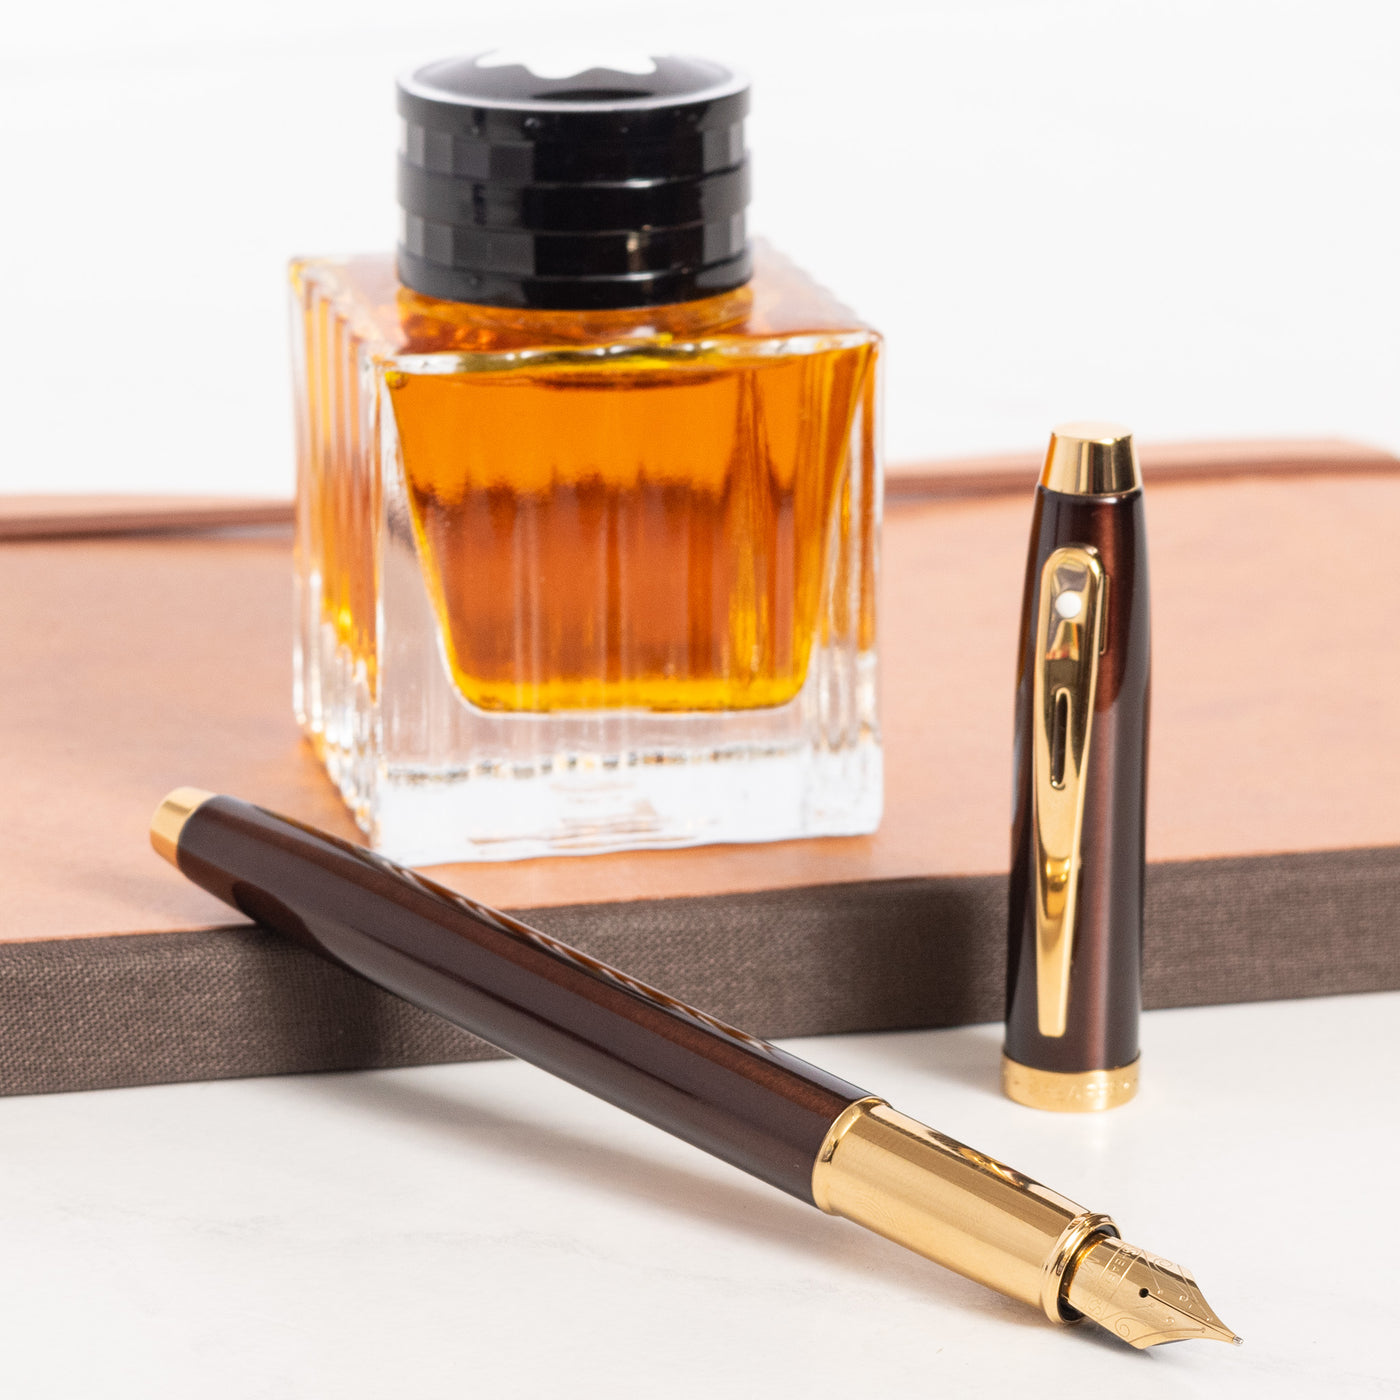 Sheaffer 100 Fountain Pen - Coffee Brown with PVD Gold Trim uncapped